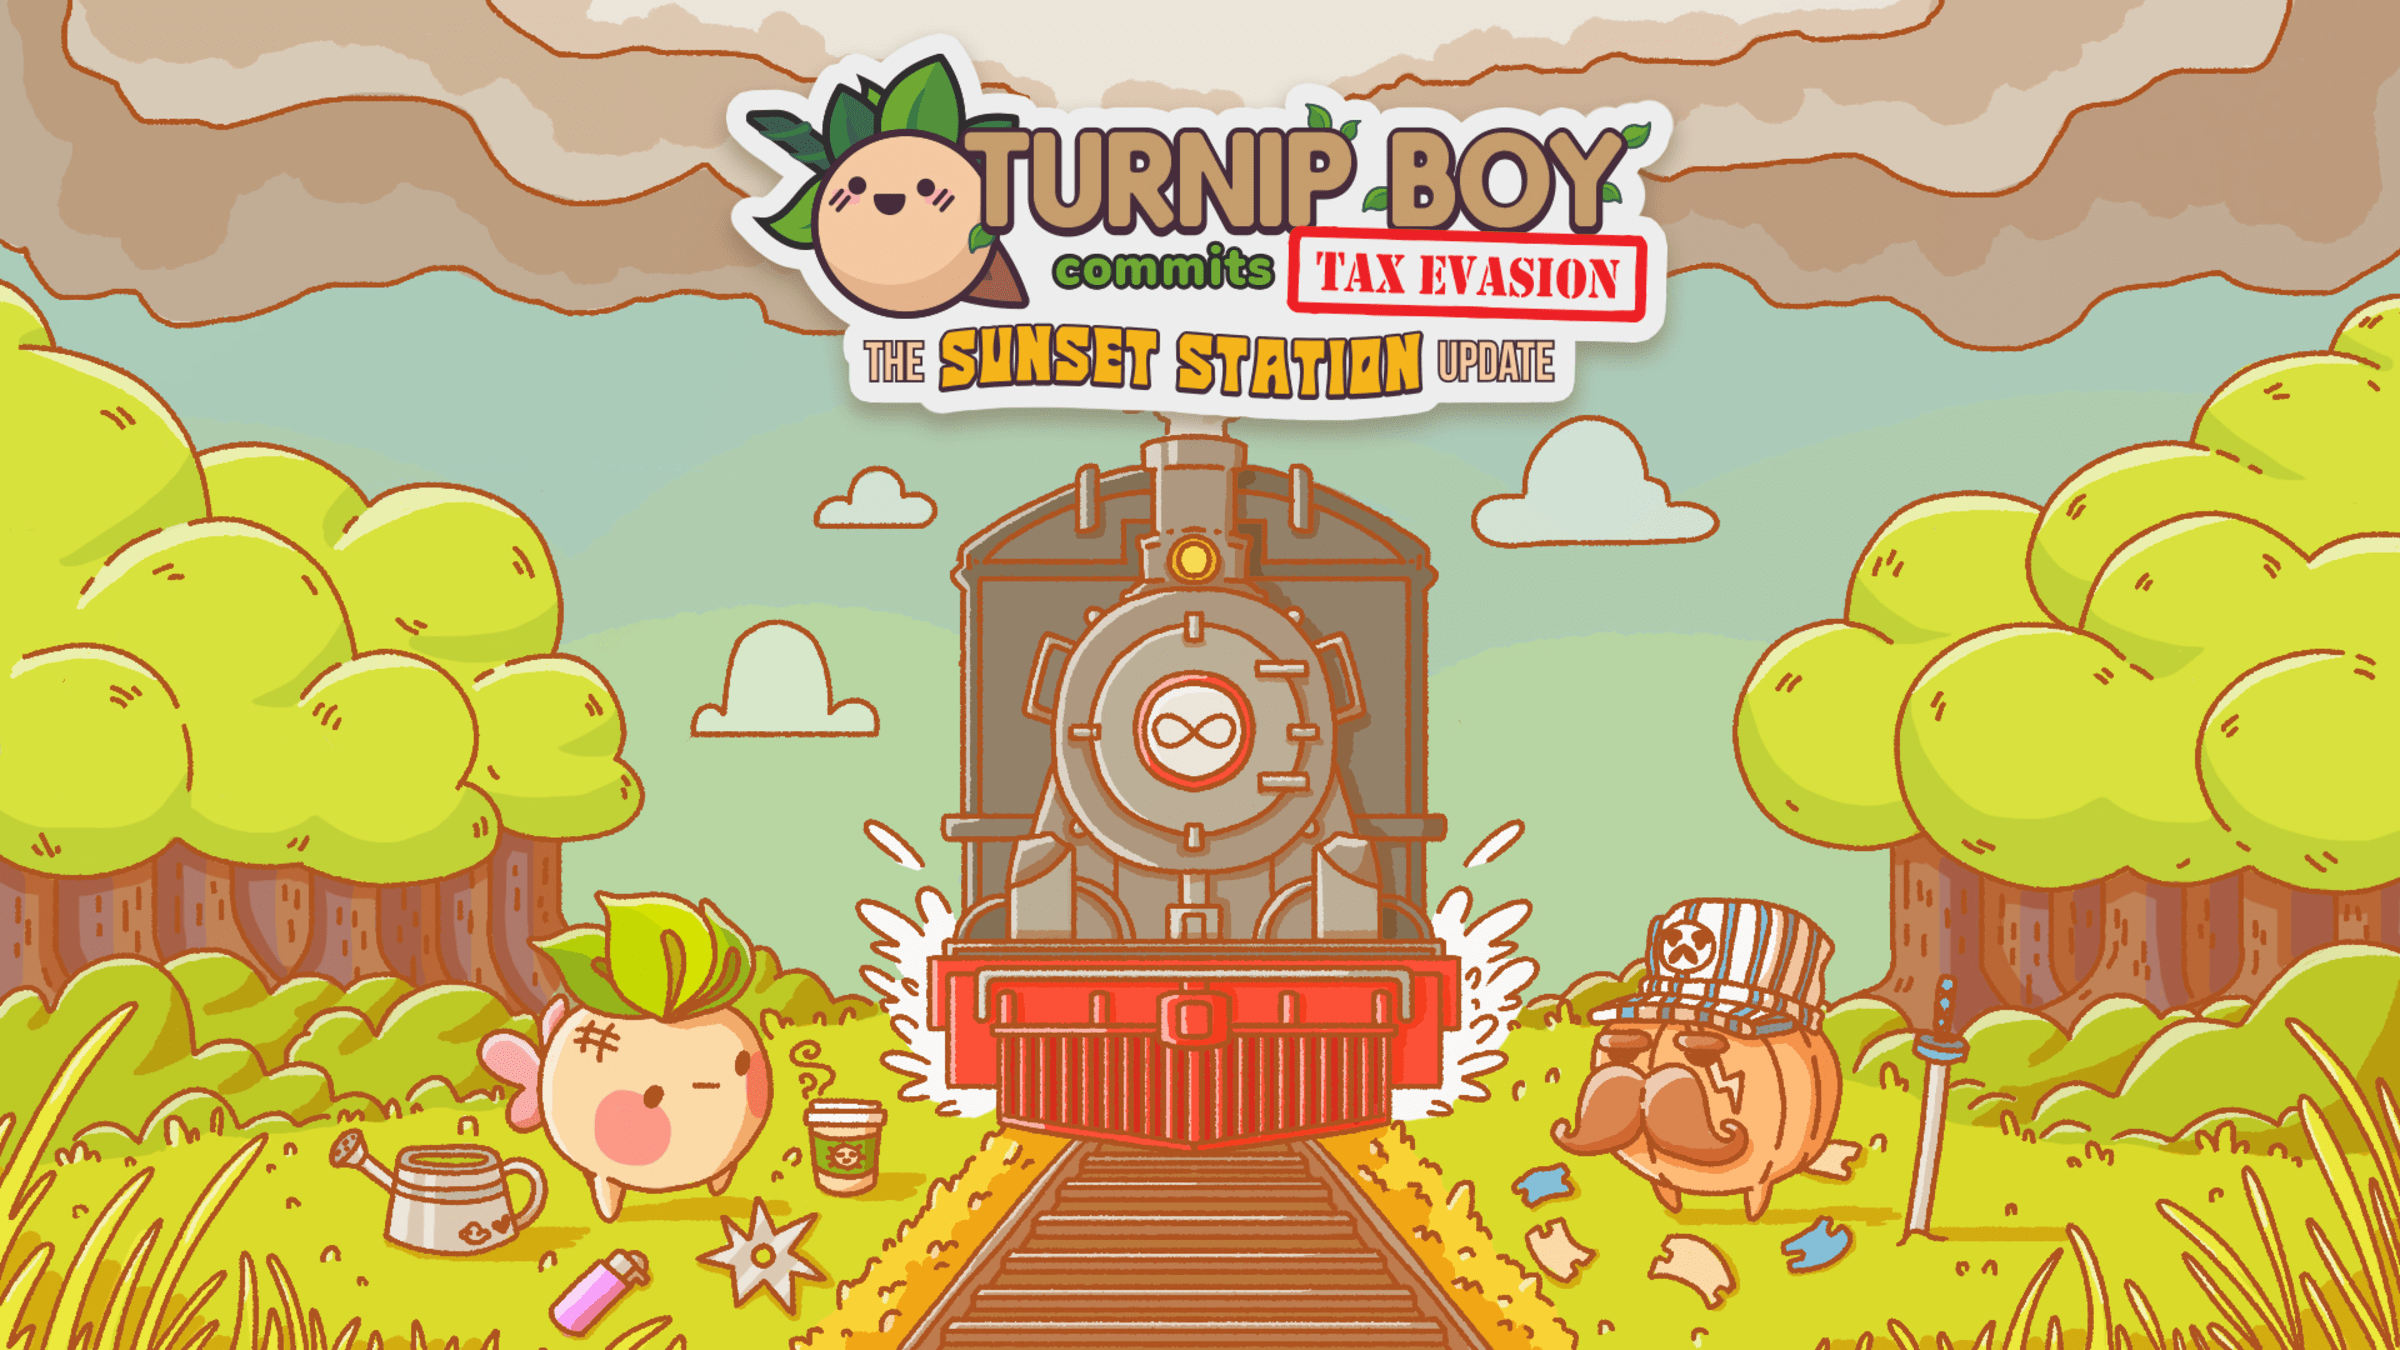 Nintendo Evasion Commits Boy Official Switch Nintendo Tax - Site Turnip for